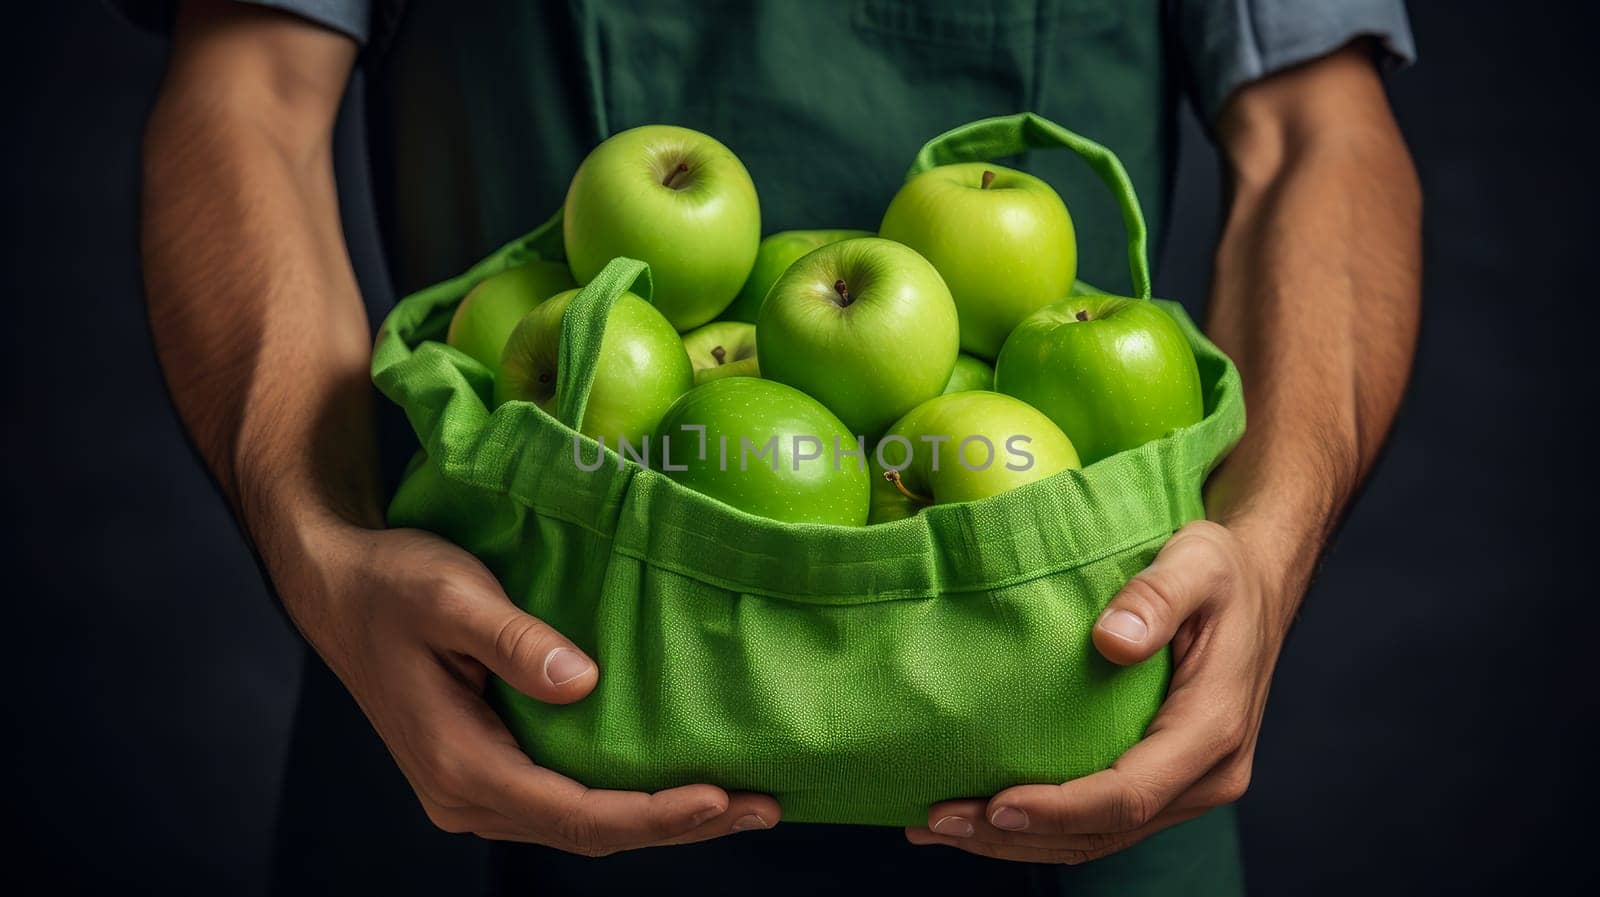 A man holds in his hands a large number of green apples in a bag made of natural fabric. by Alla_Yurtayeva